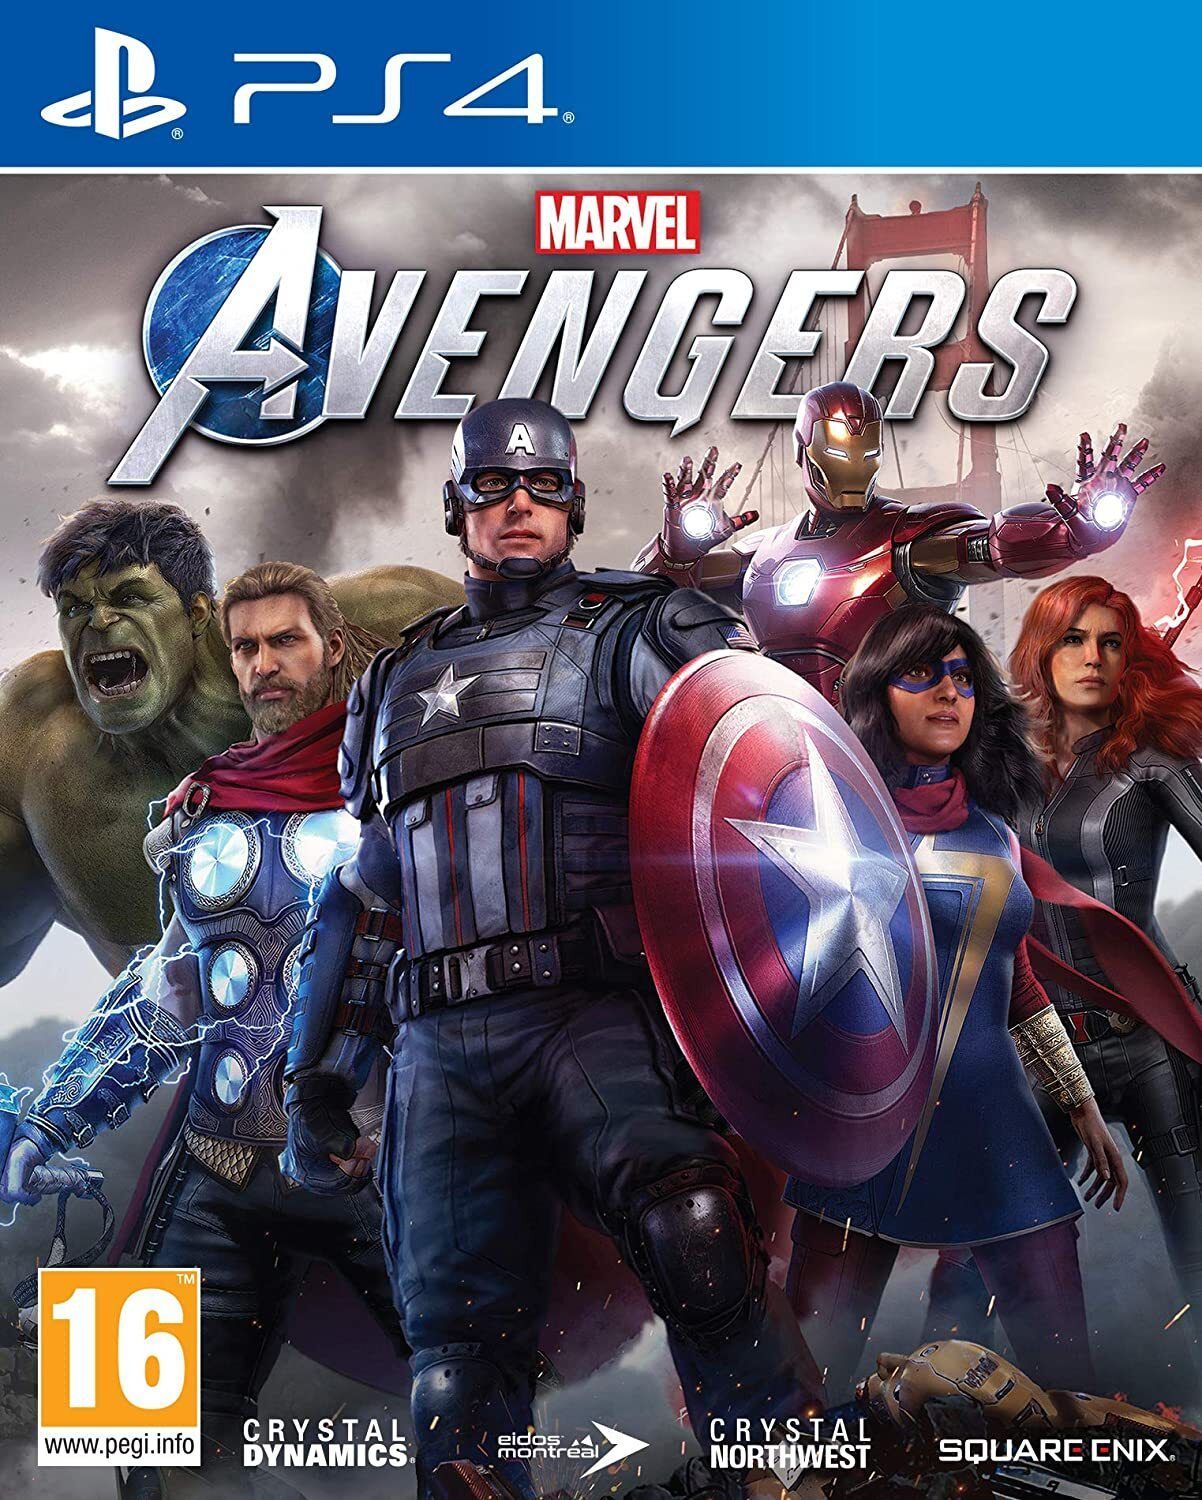 Marvel's Avengers - Videojuego (PS4, PC, Xbox One, PS5 y Xbox Series X/S) Vandal